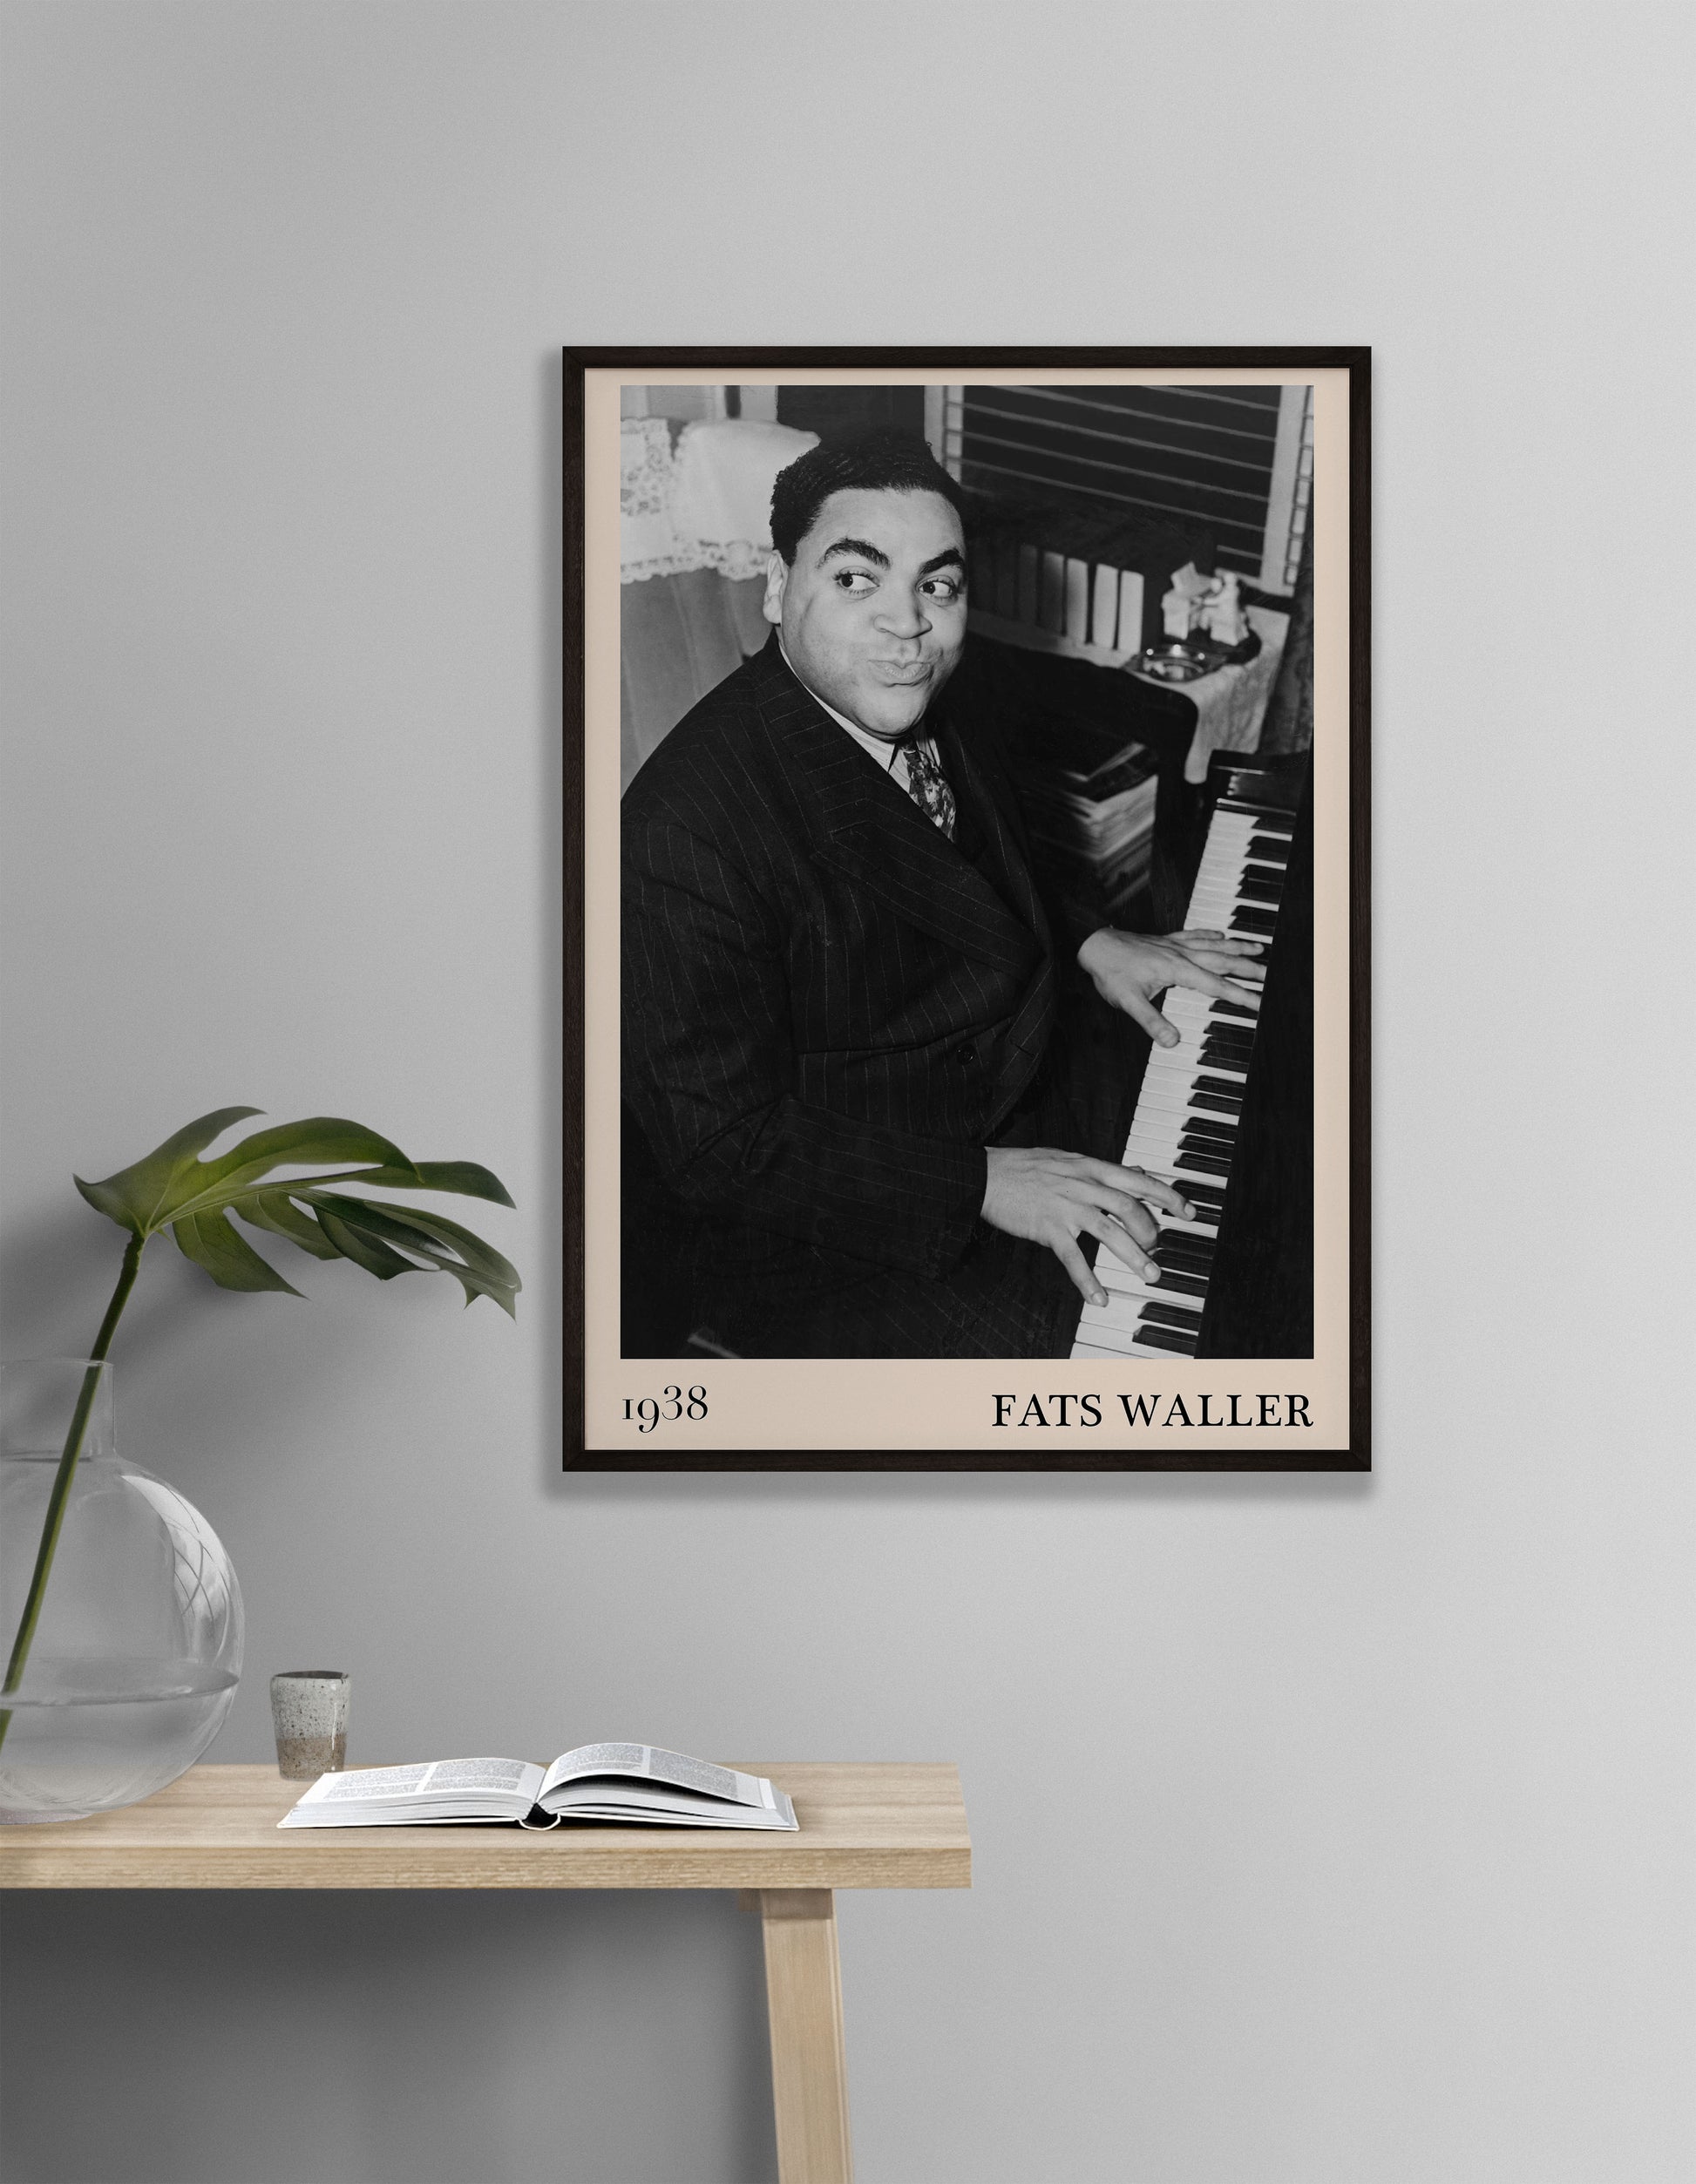 1938 photograph of Fats Waller crafted into a vintage black framed jazz poster. The poster is hanging on a grey living room wall.